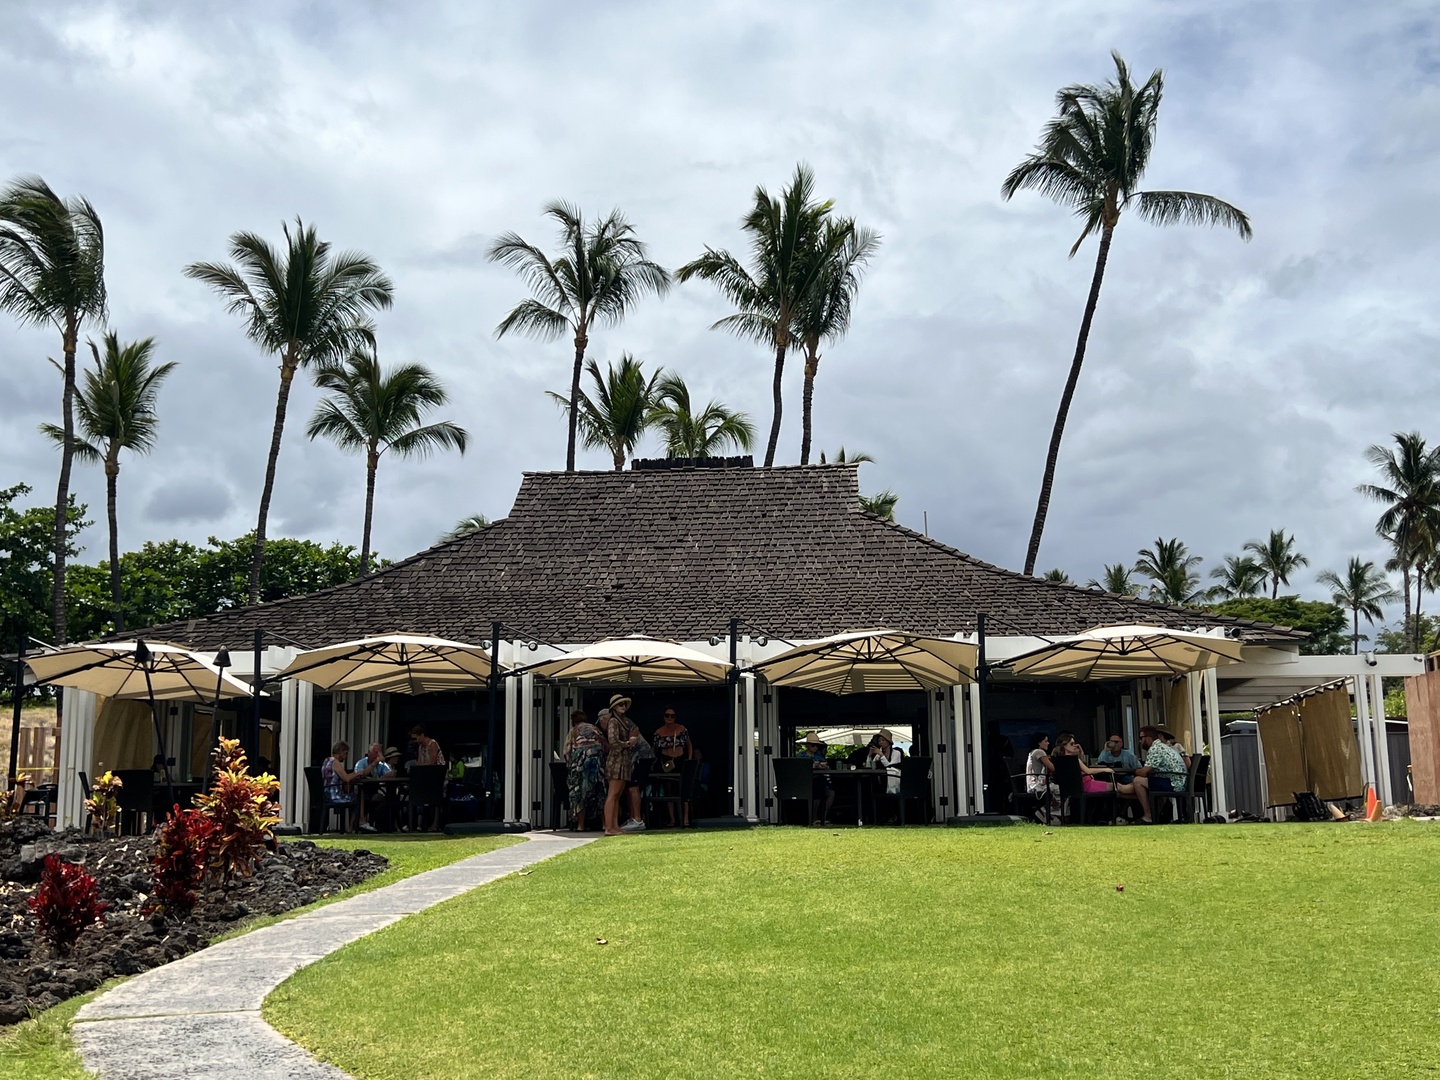 Kamuela Vacation Rentals, Kulalani 1701 at Mauna Lani - Dine Amidst the Breezes at Our Open-Air Beachside Restaurant, Where the Waves Serenade Every Bite.